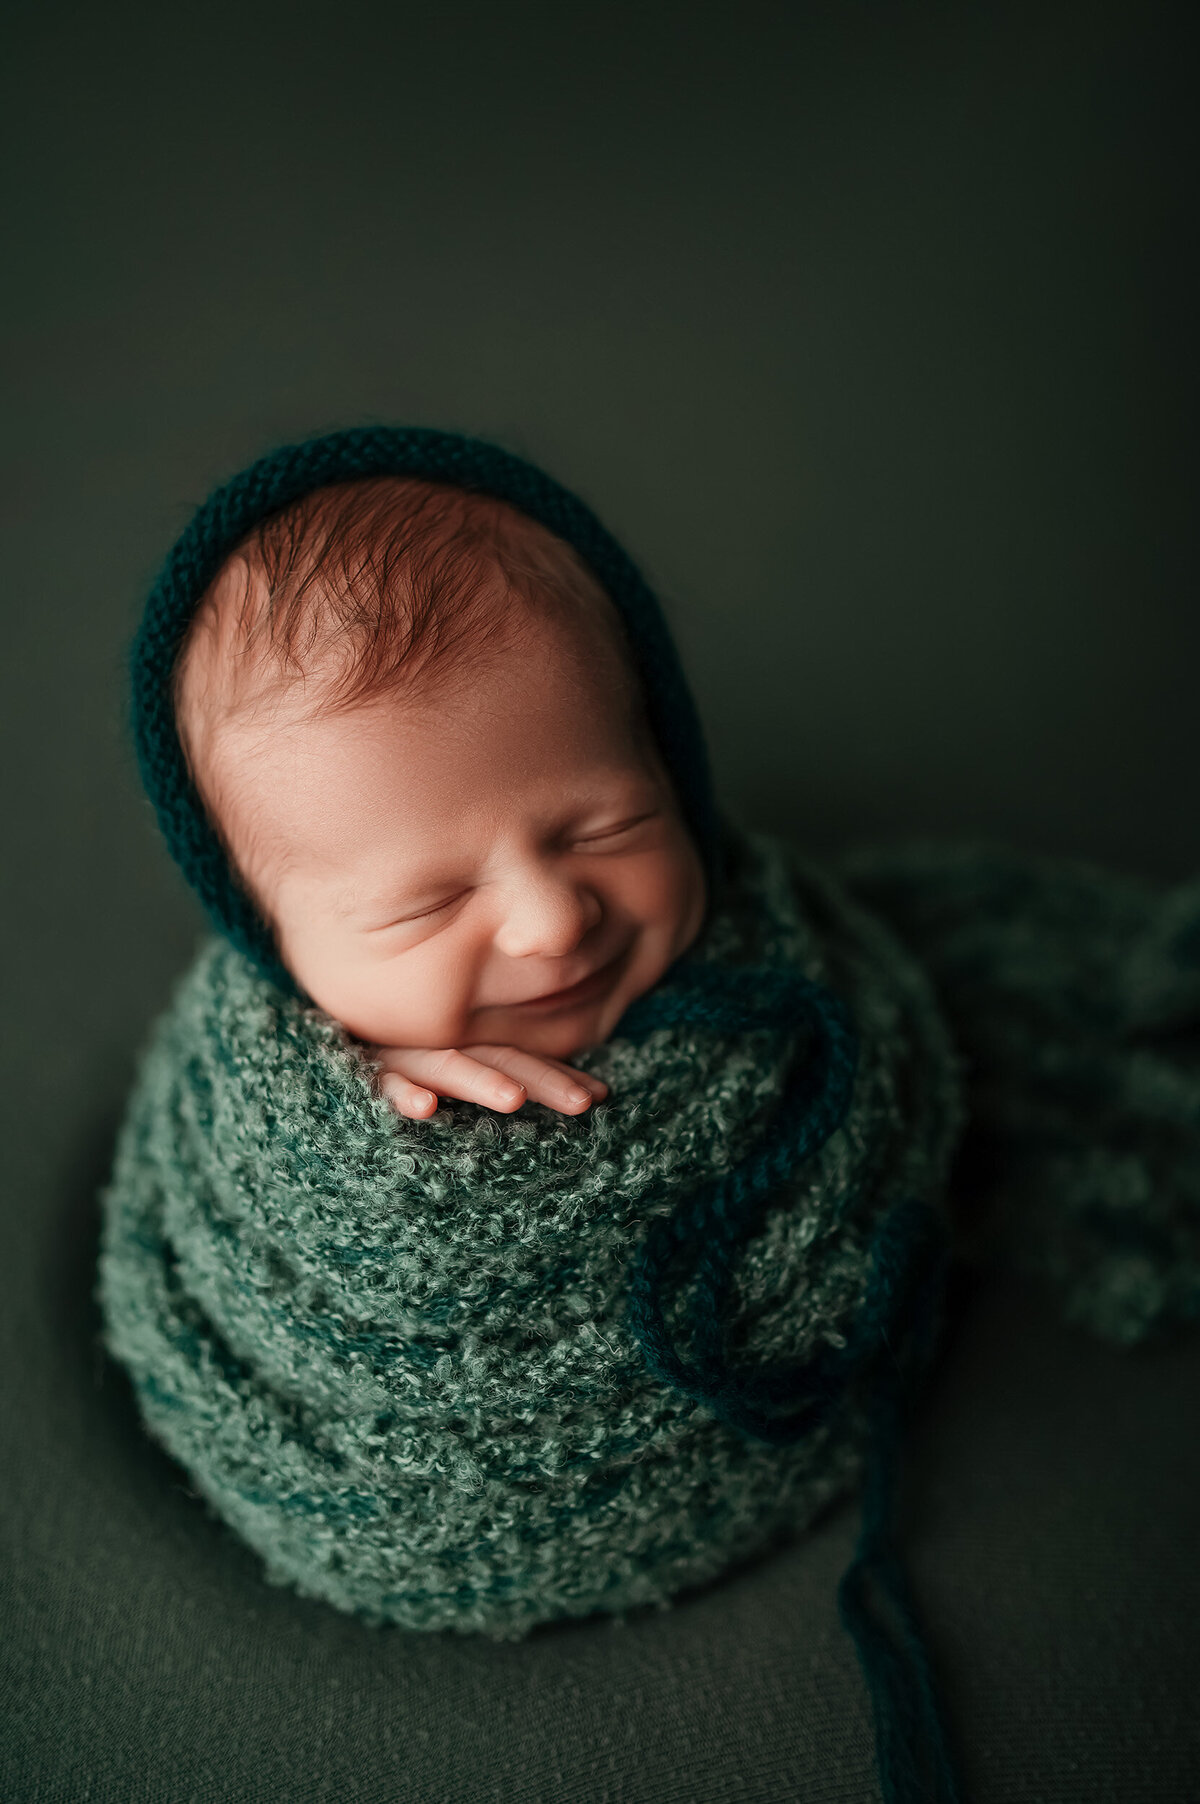 Portrait of infant smiling with eyes closed while swaddled in green terrycloth. Take in our Waukesha, WI photo studio.